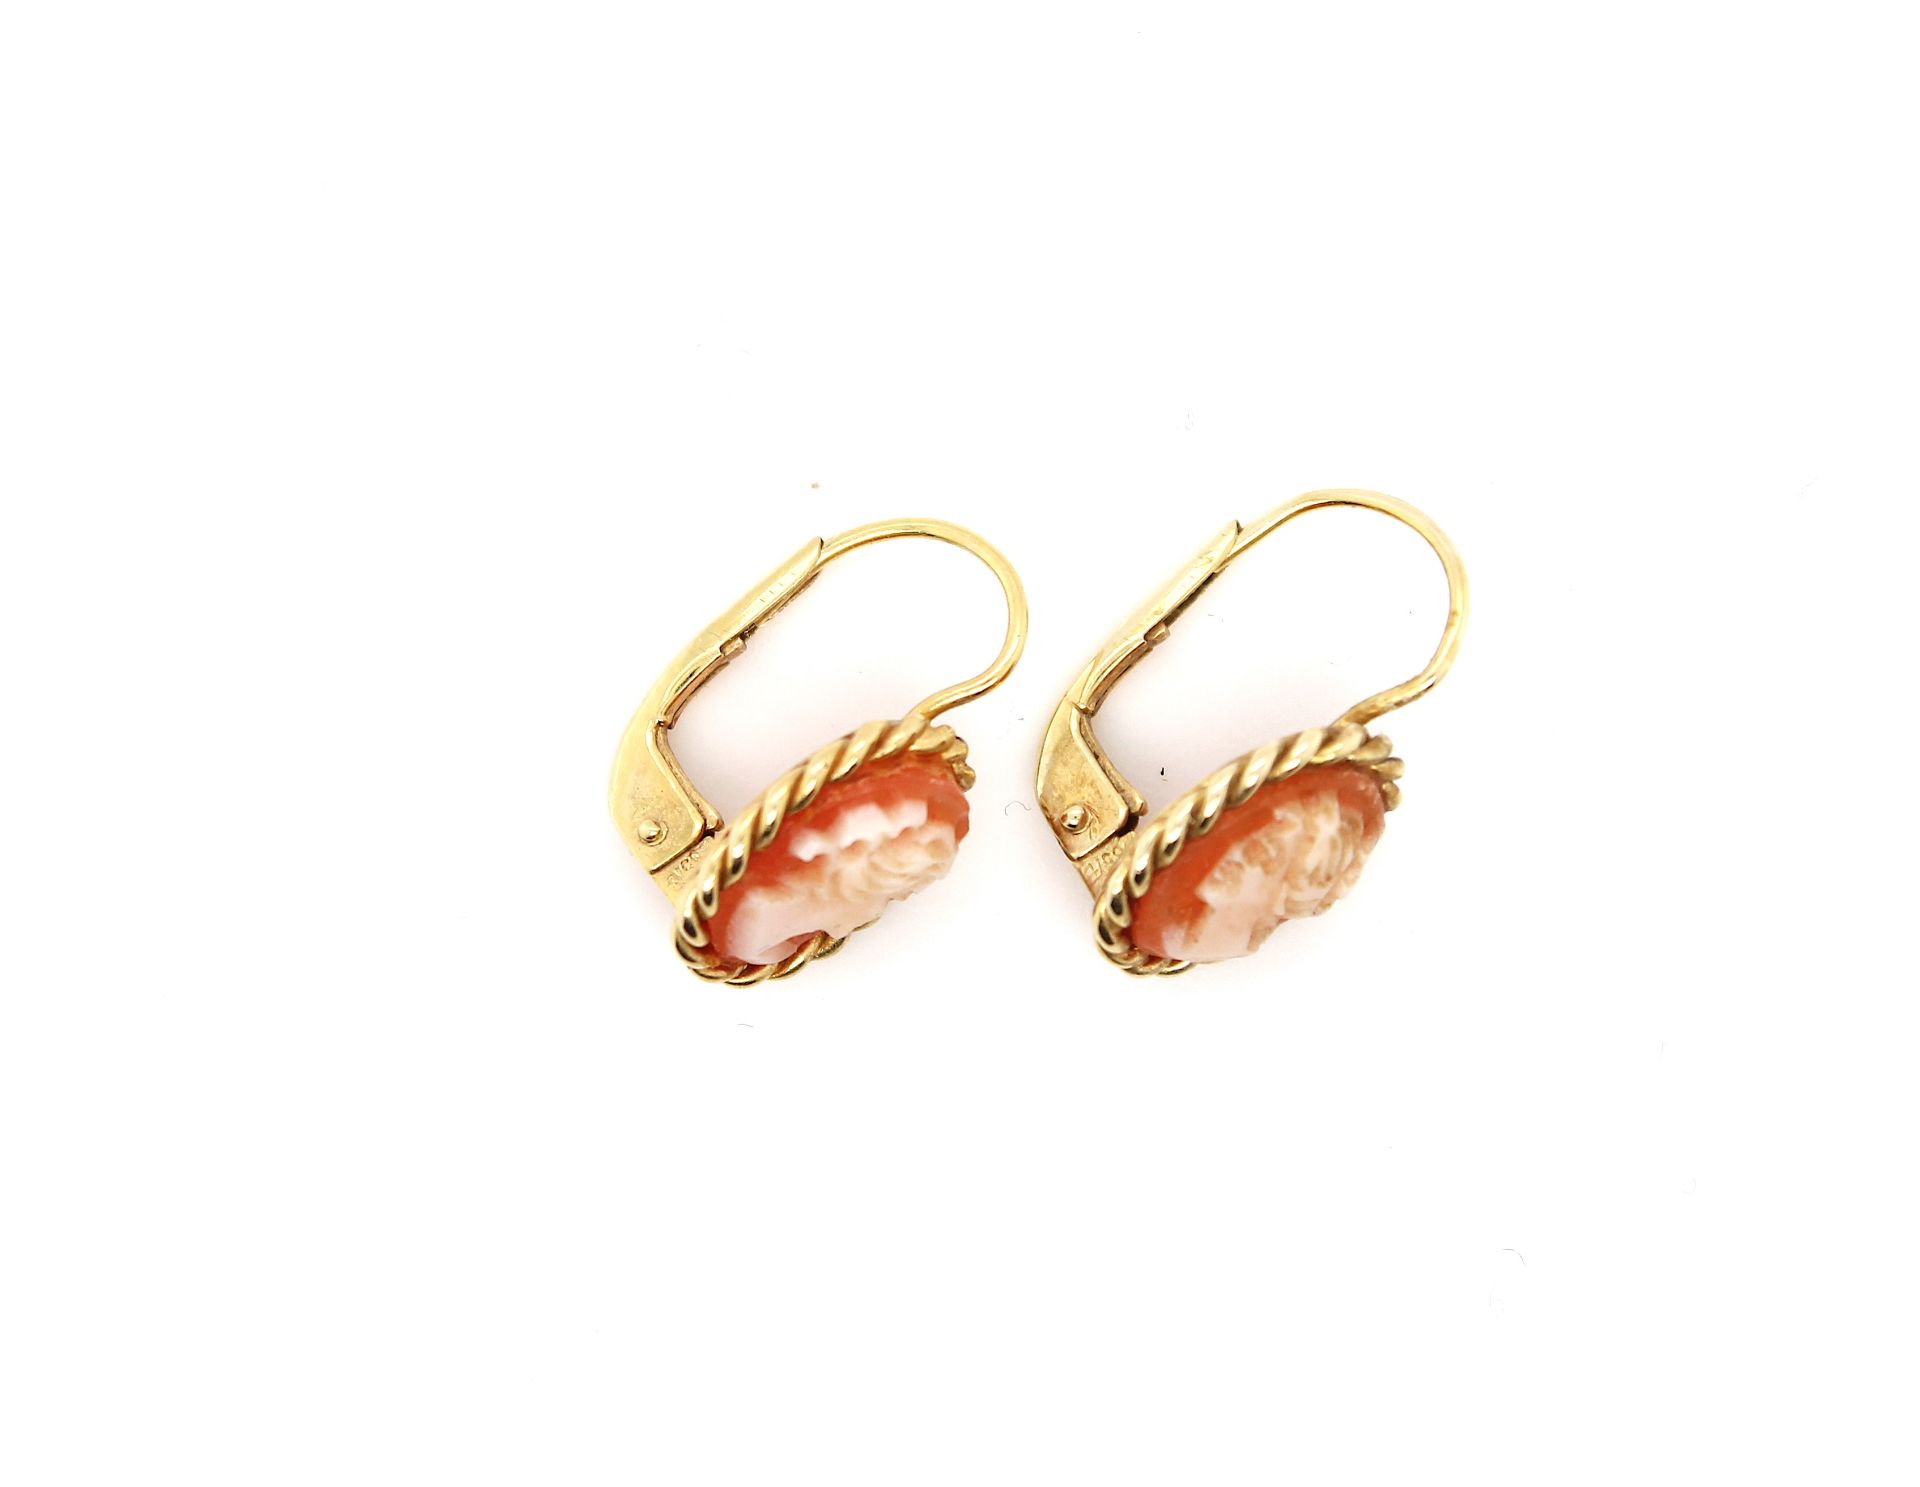 1 ring and a pair of earrings with shell gemstones - Image 5 of 5